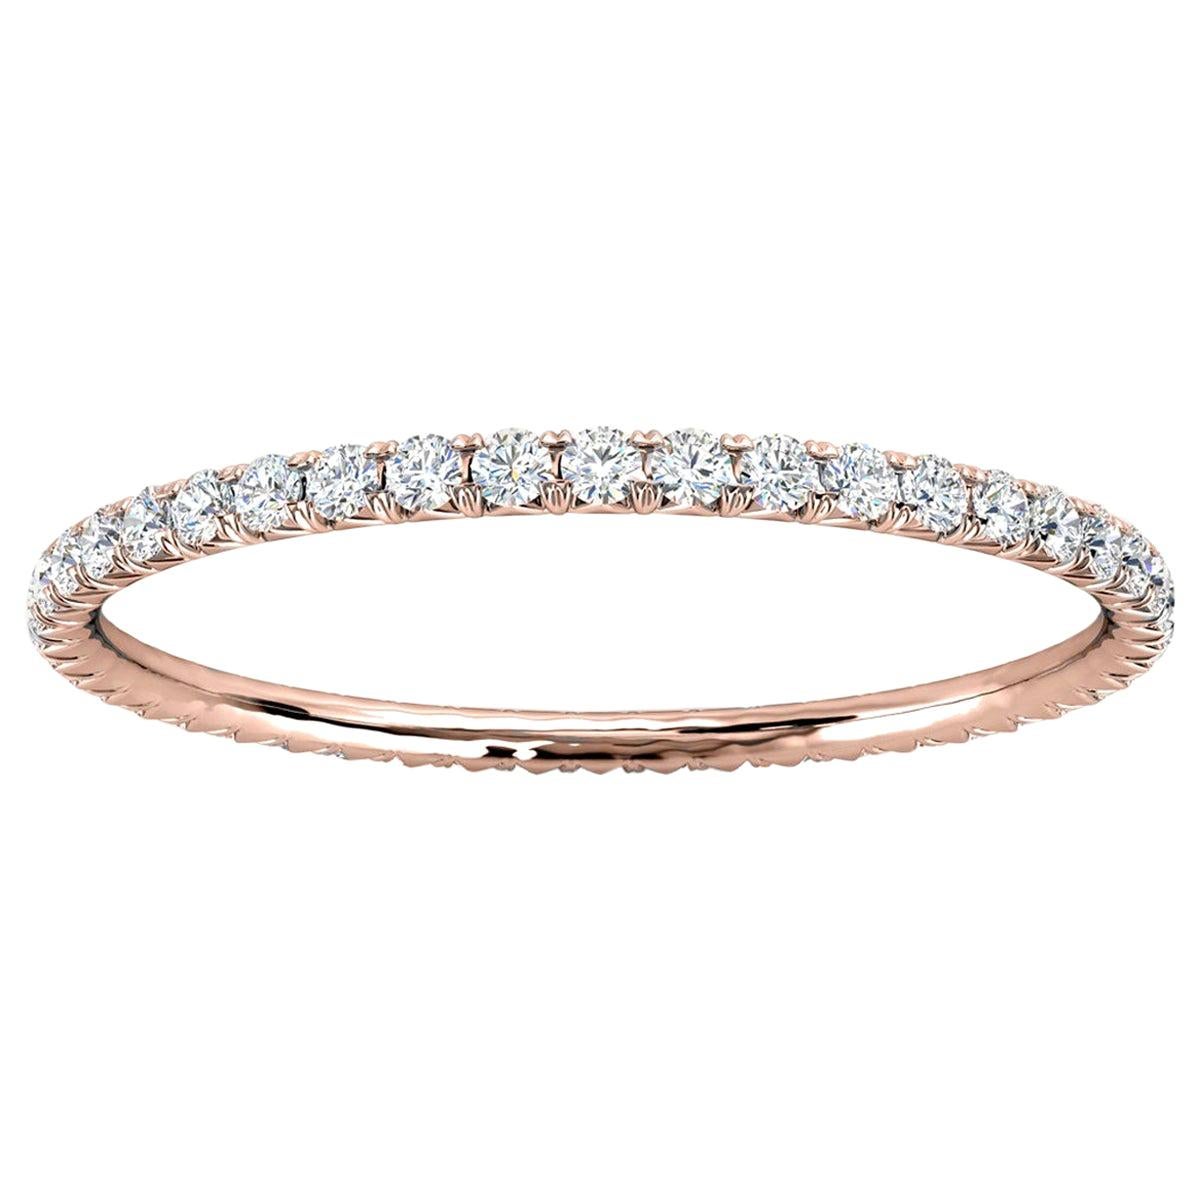 For Sale:  14k Rose Gold Mia Petite French Pave Diamond Eternity Ring '1/4 Ct. Tw'